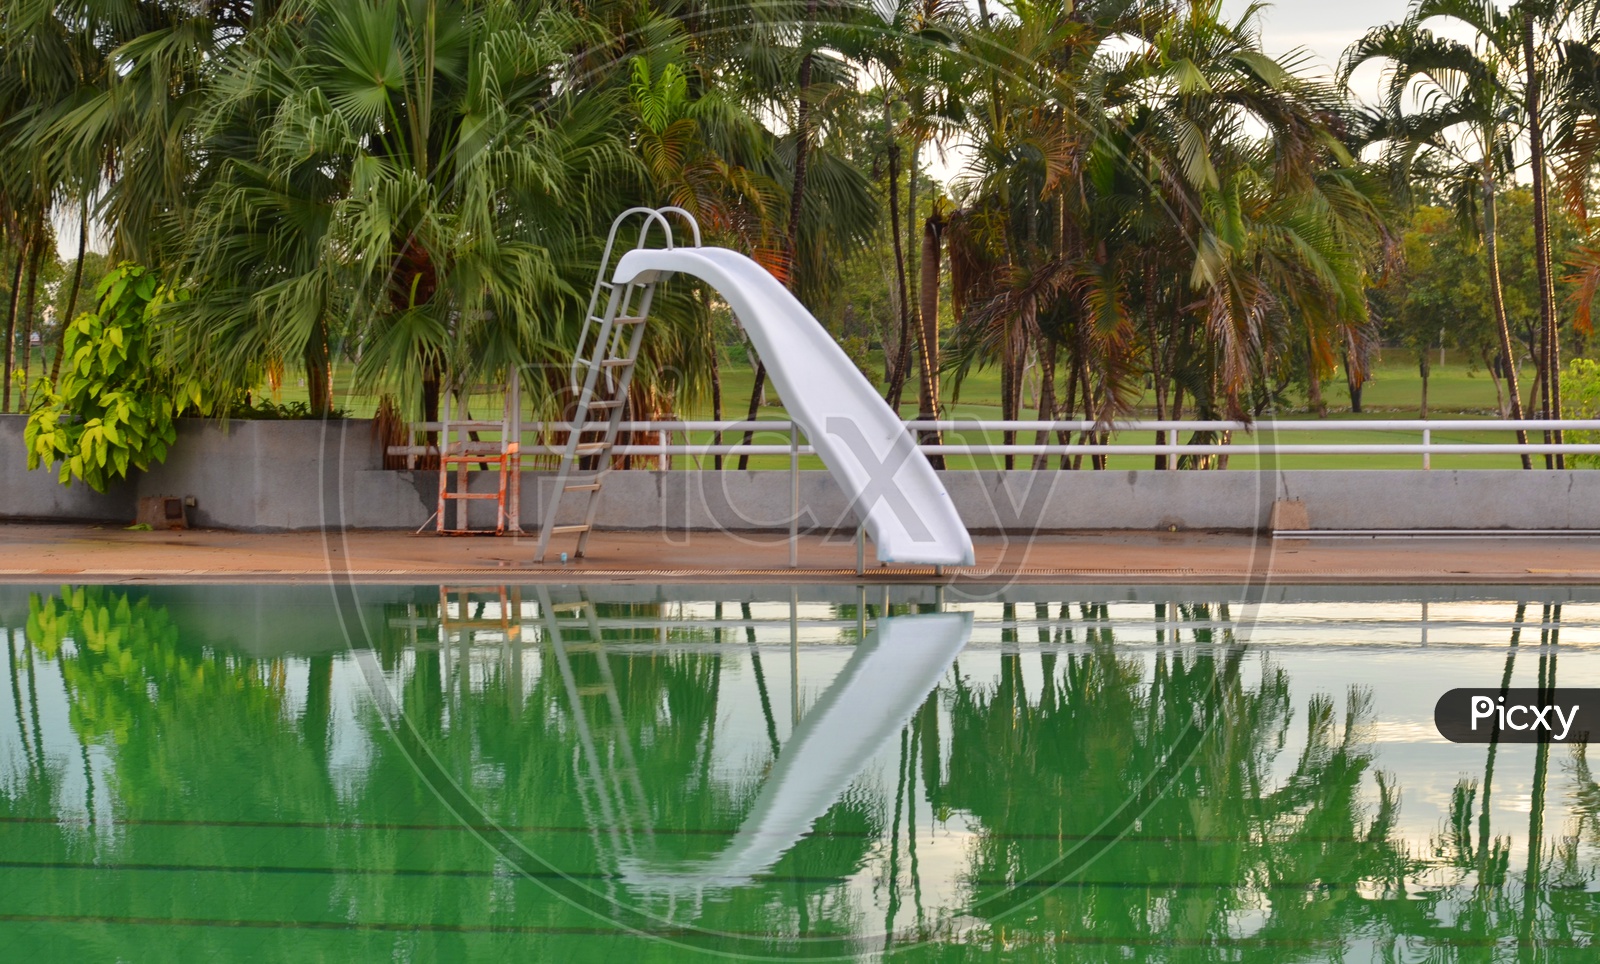 A Water Slide by the swimming pool